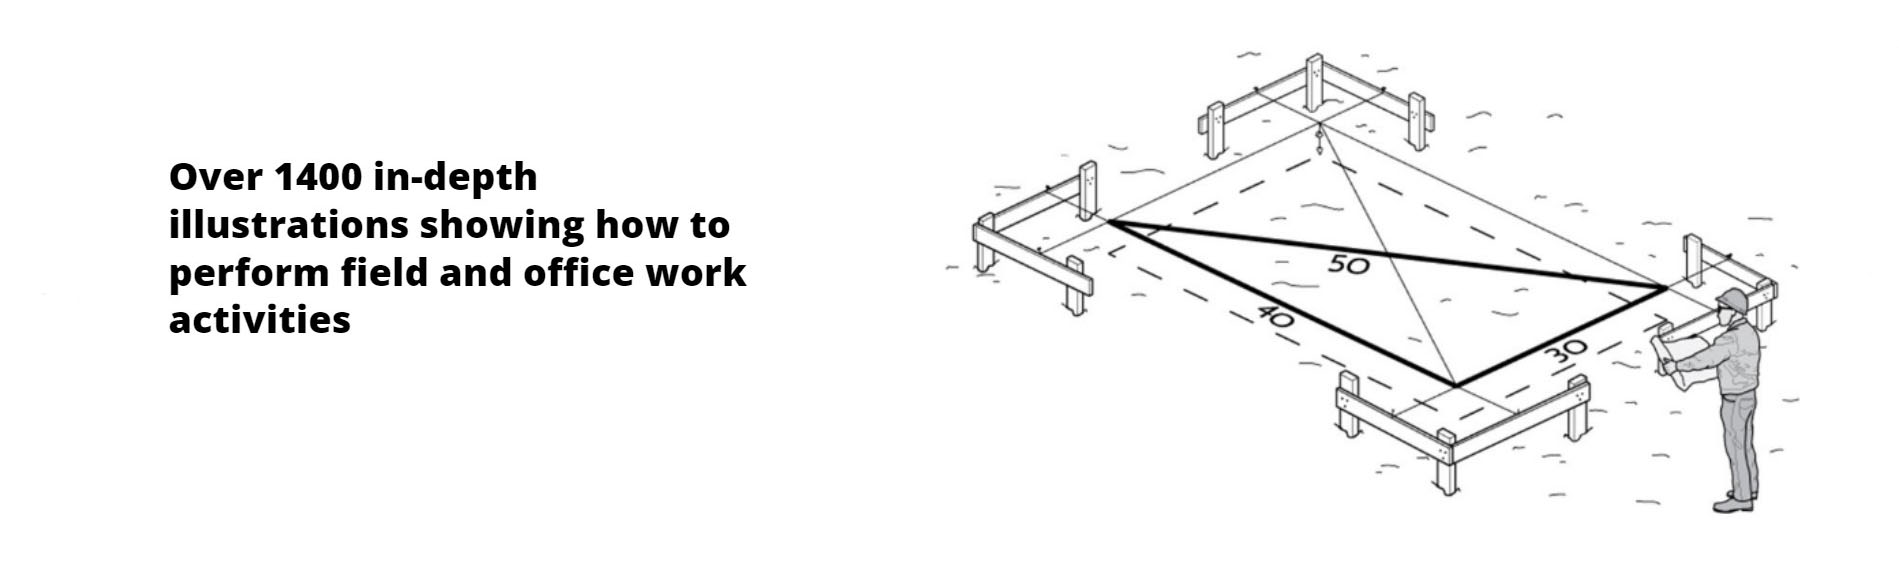 Over 1400 in-deptth illustrations showing how to perform field and office work activities